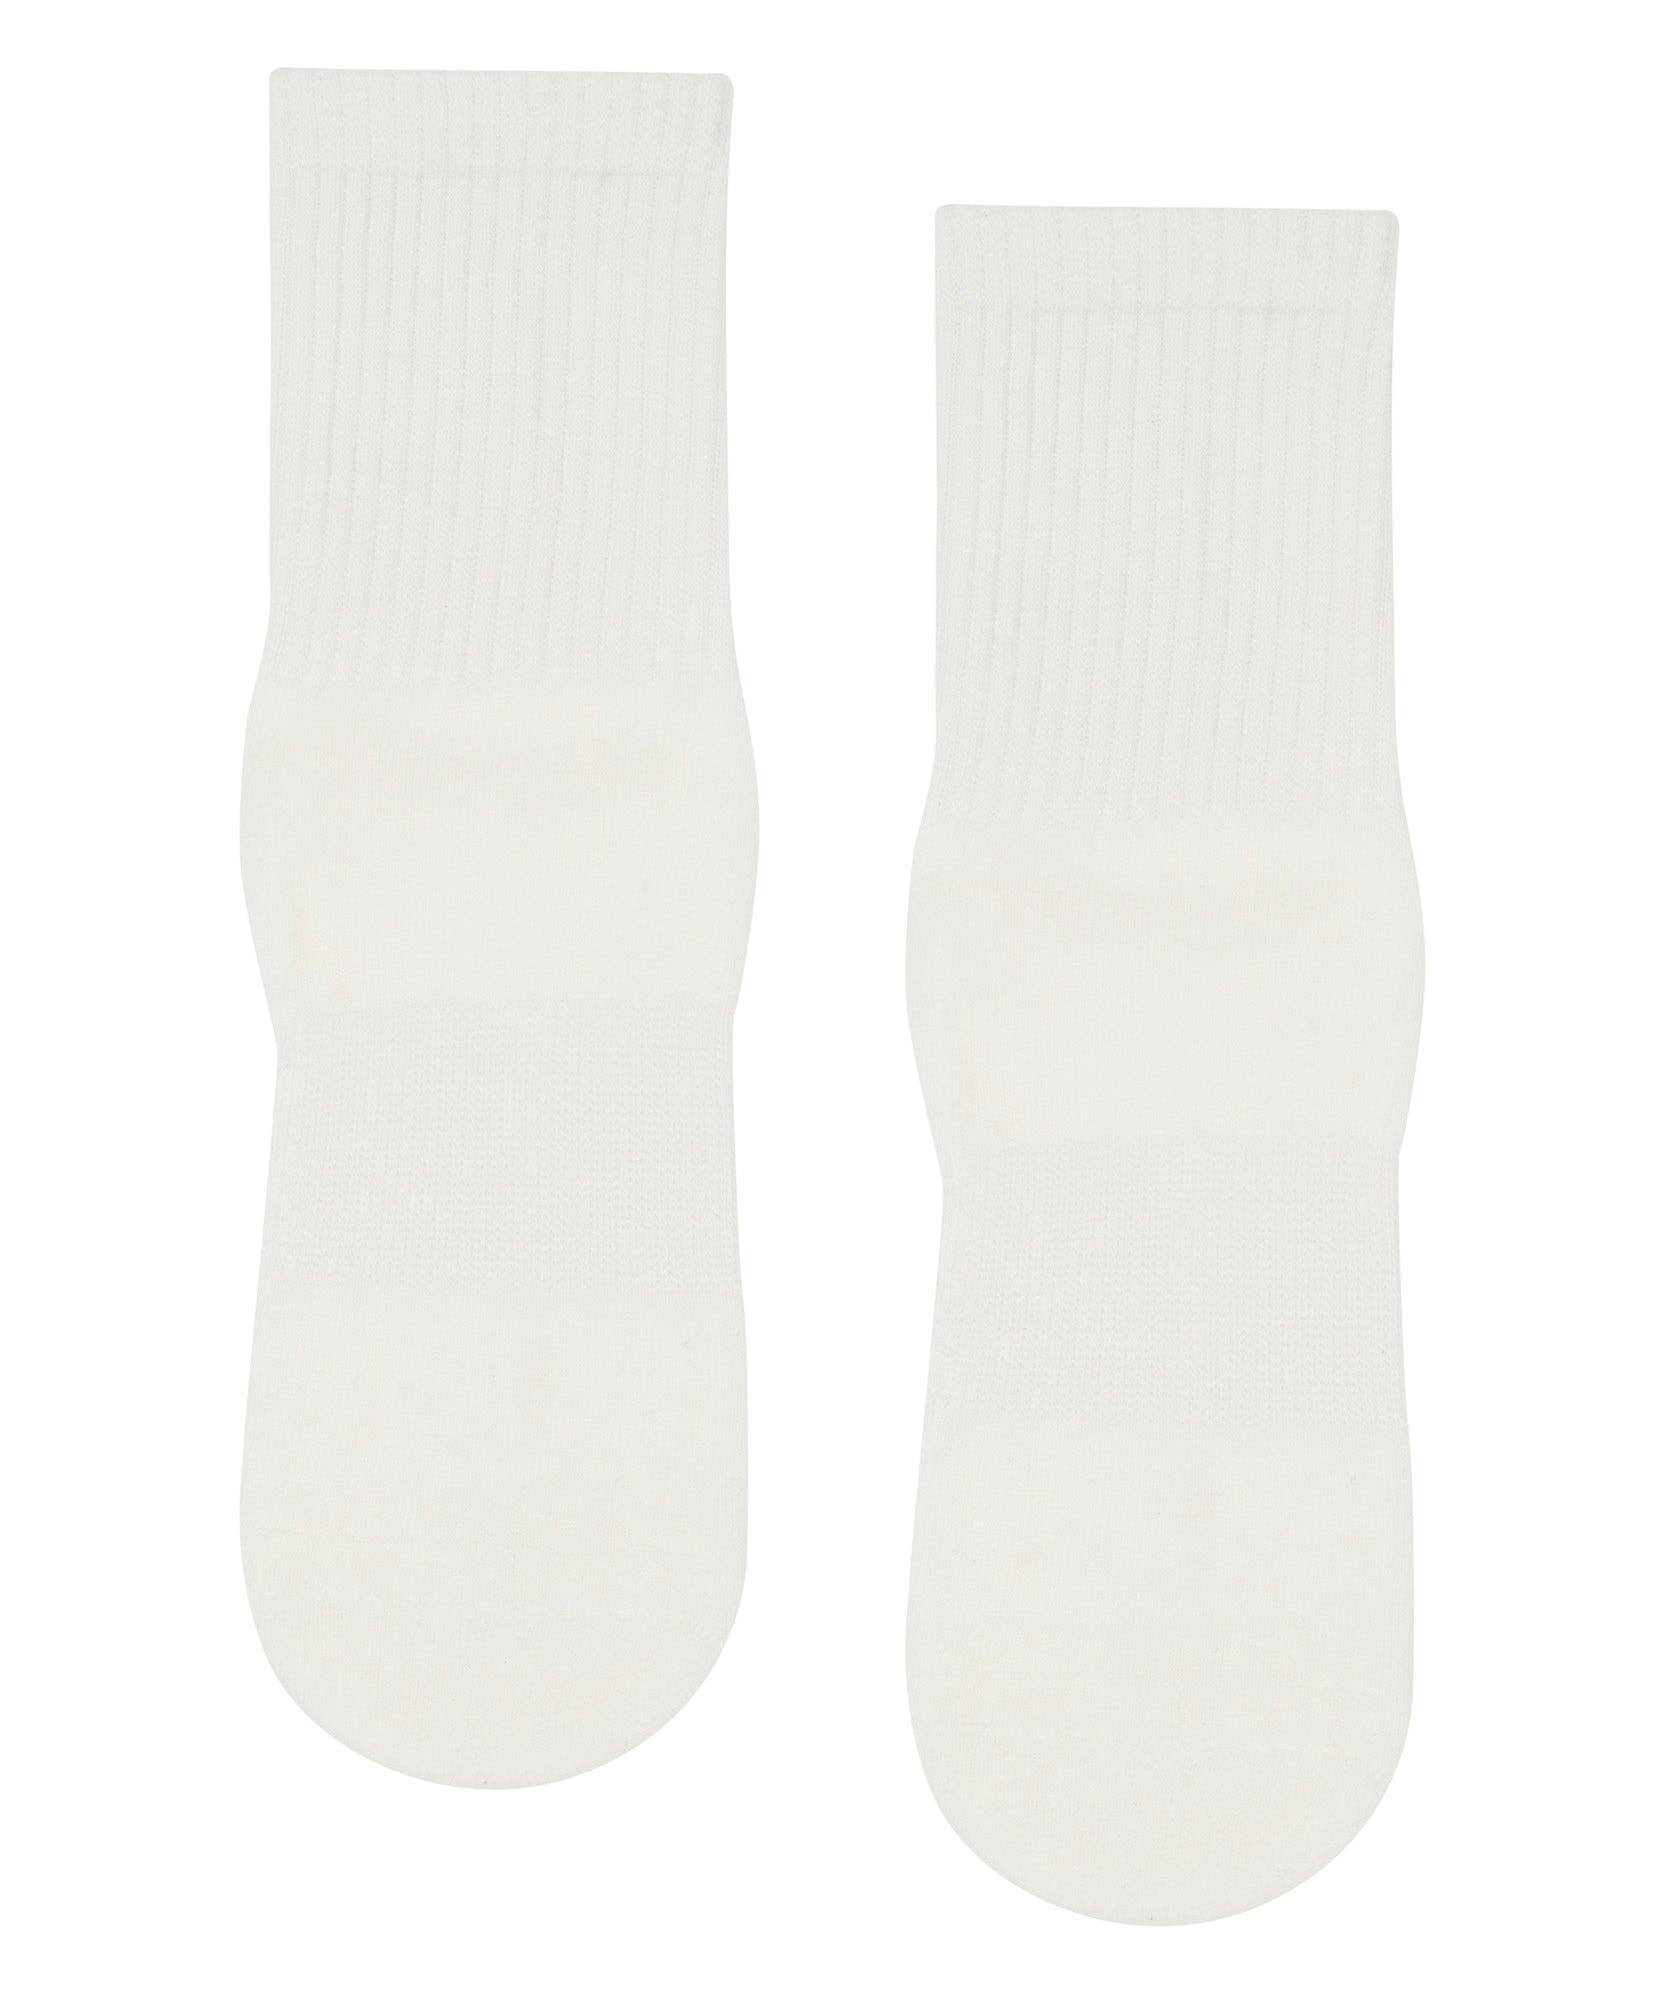 Classic Low Rise Grip Socks - Milky Way Tie-Dye – MoveActive Int